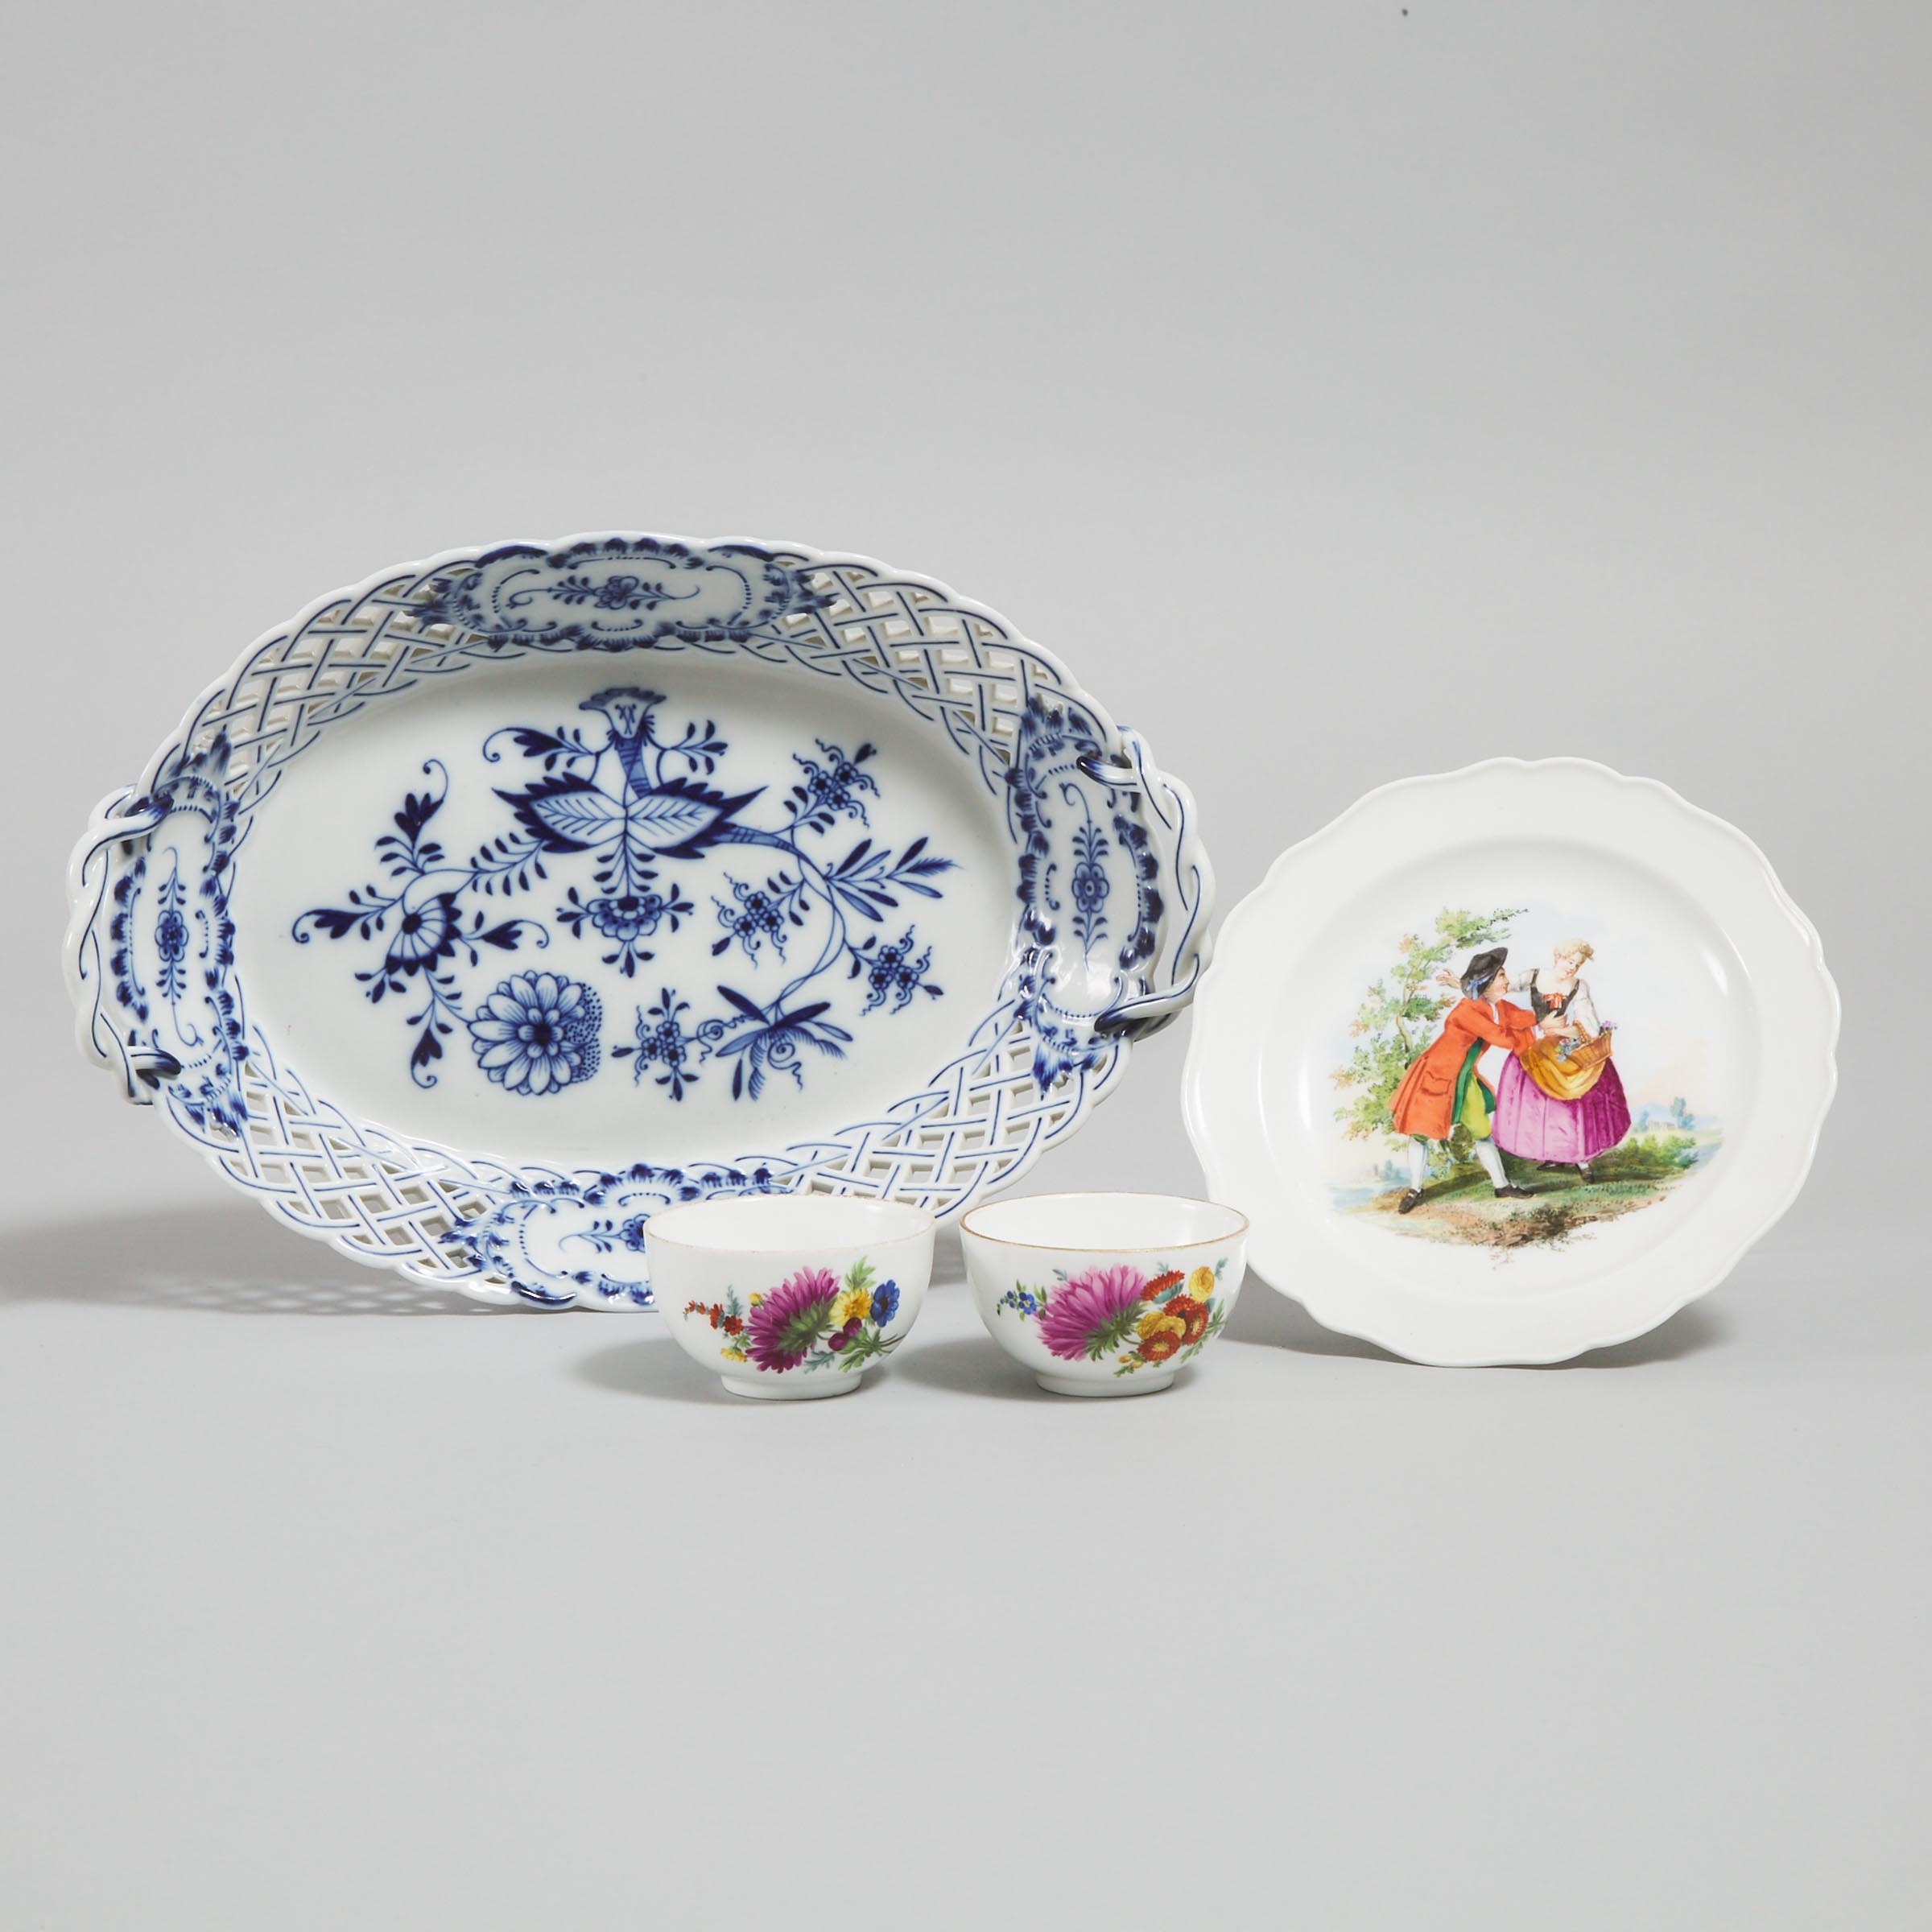 Meissen 'Onion' Pattern Reticulated Oval Basket, a Small Plate Painted with Figures and Two Floral Tea Bowls, 19th/early 20th century